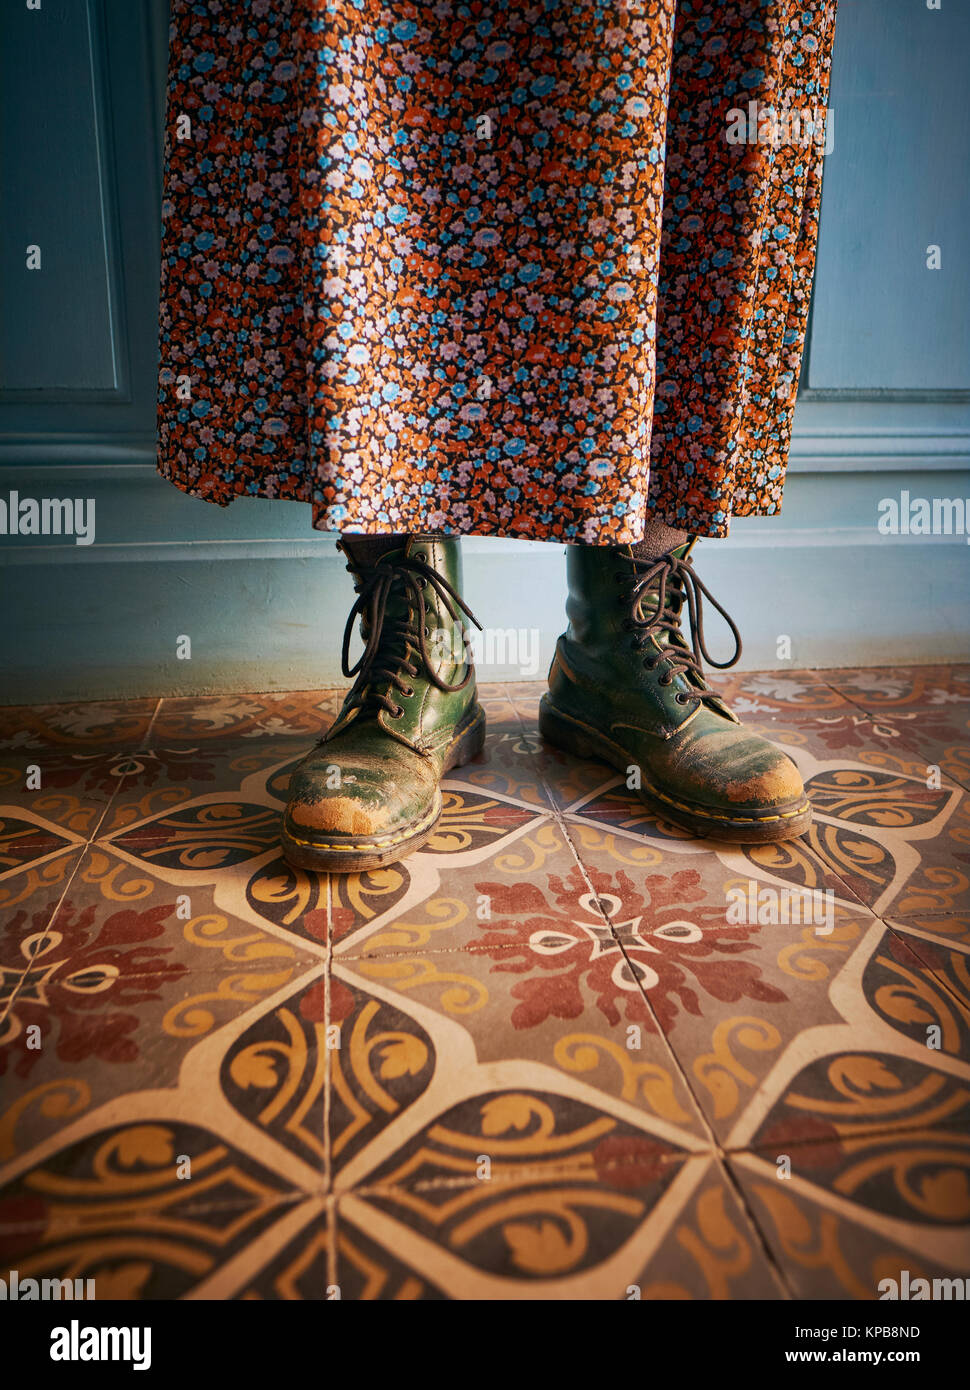 Wearing worn green Dr Martens boots / shoes with a skirt in a rustic style french house interior - work boots - odd - quirky style Stock Photo